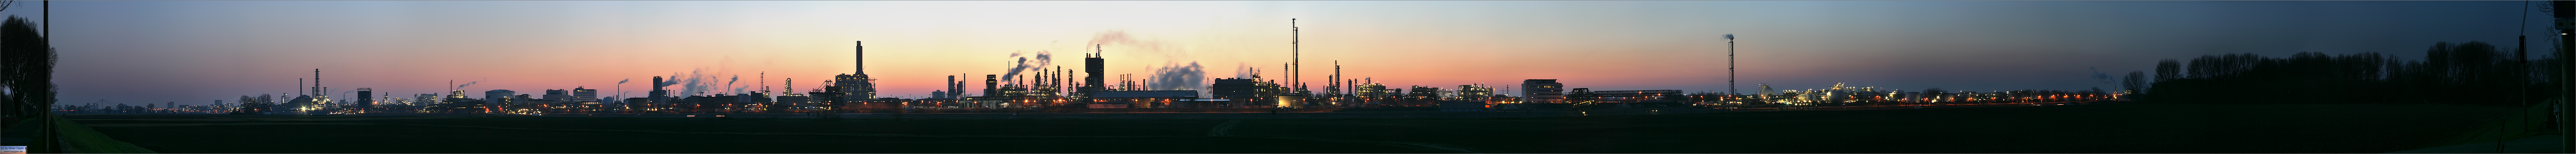 Panorama Industrie - (c) by Oliver Opper